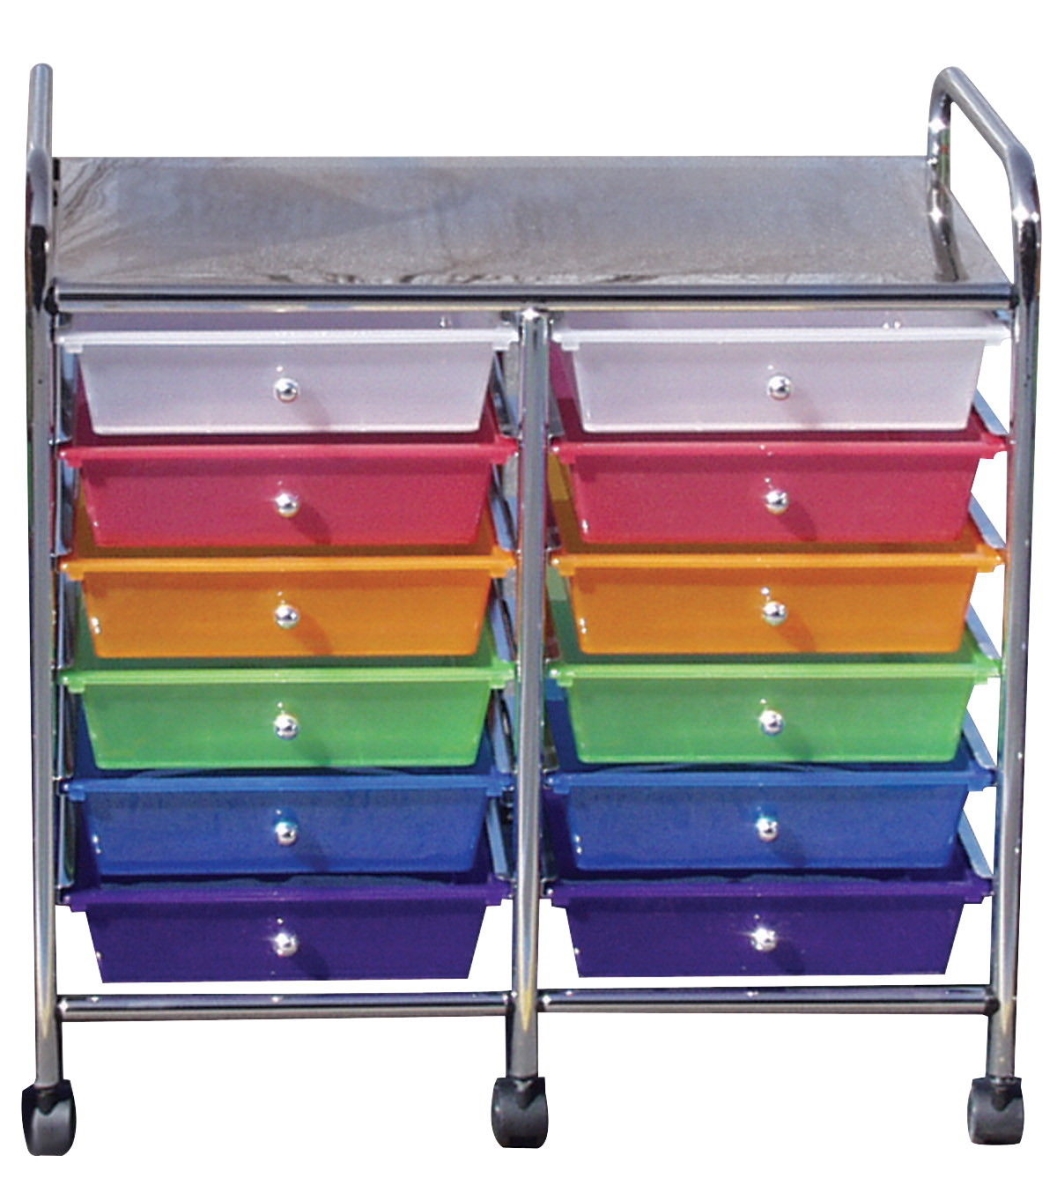 335905 Early Childhood Resources Mobile Organizer, 25.5 X 15.5 X 26.25 In., Multiple Color